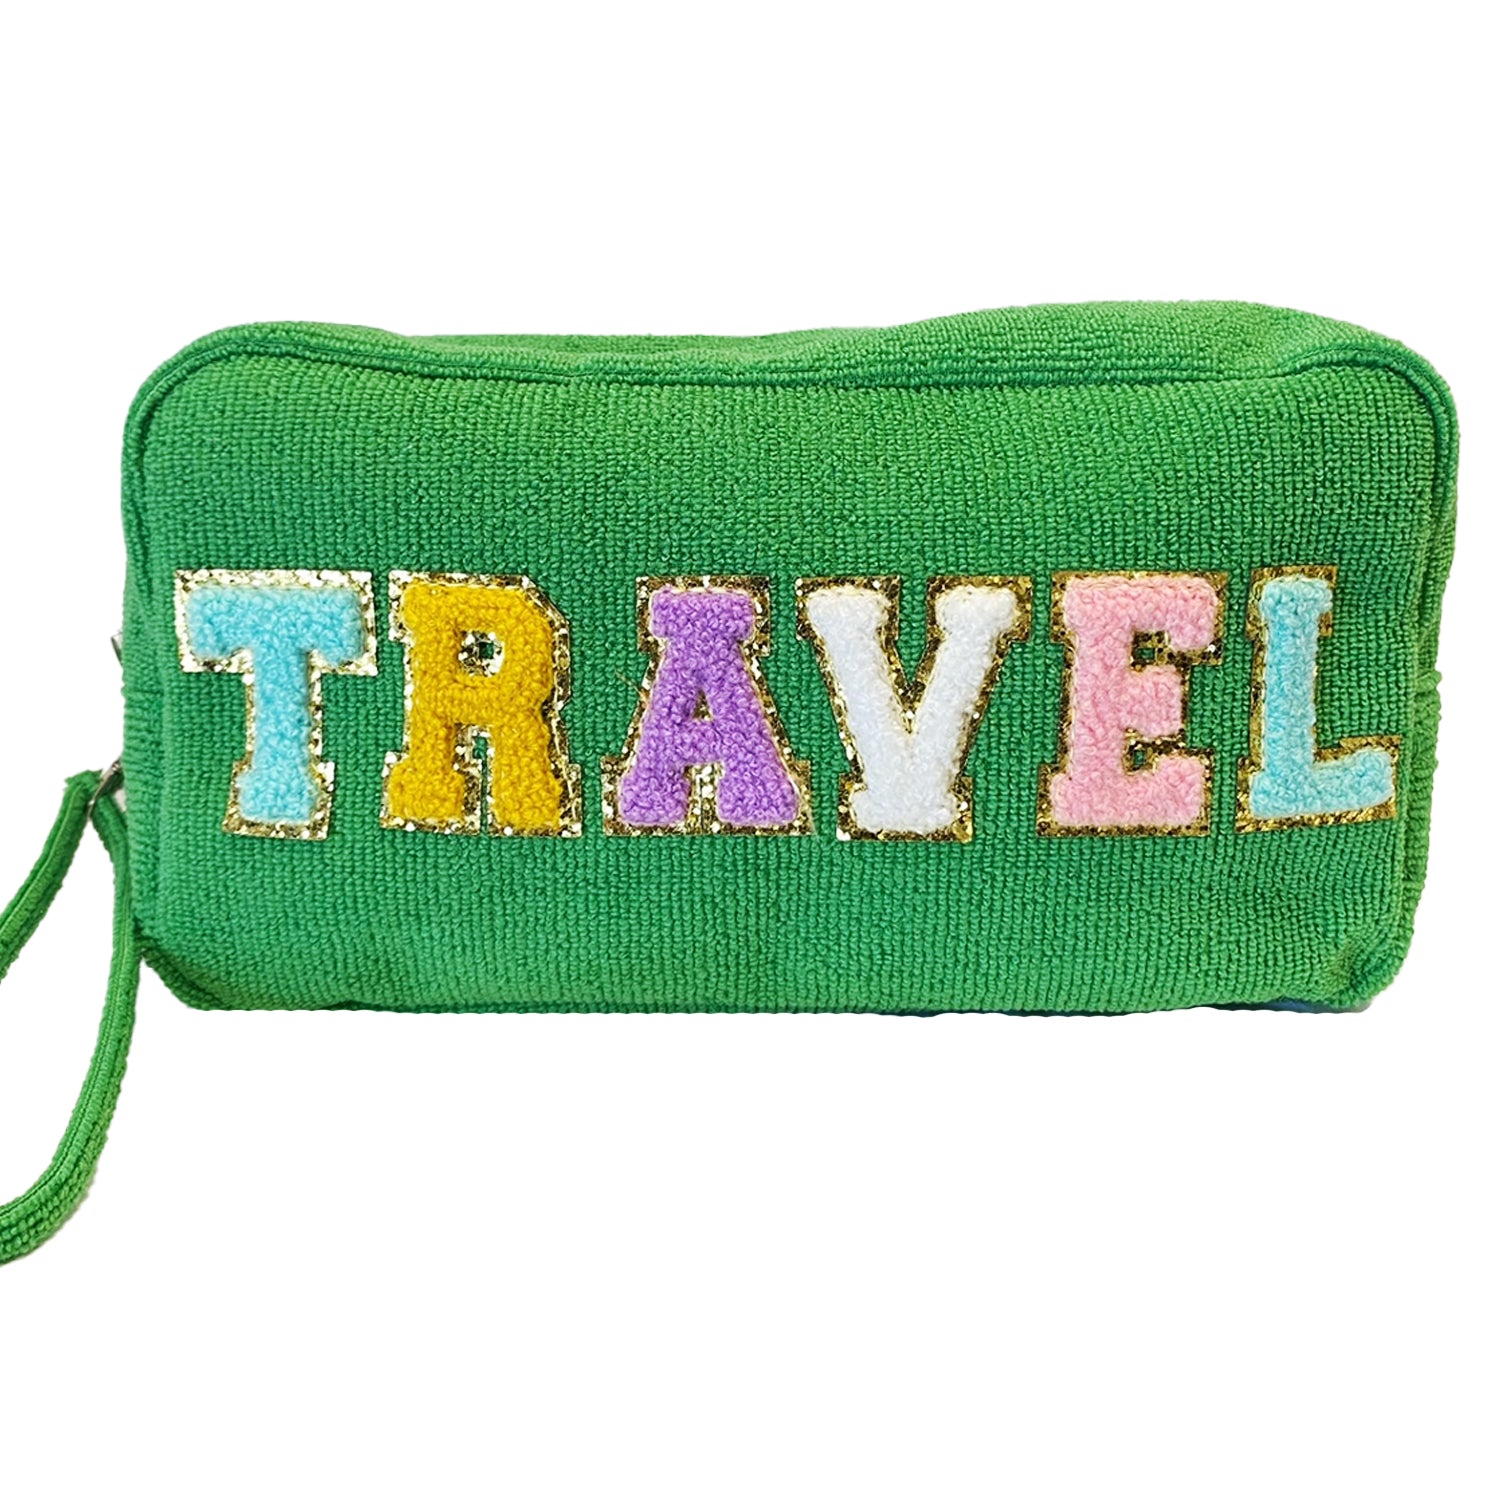 TC-1355 Terry Cloth Cosmetic Bag Travel